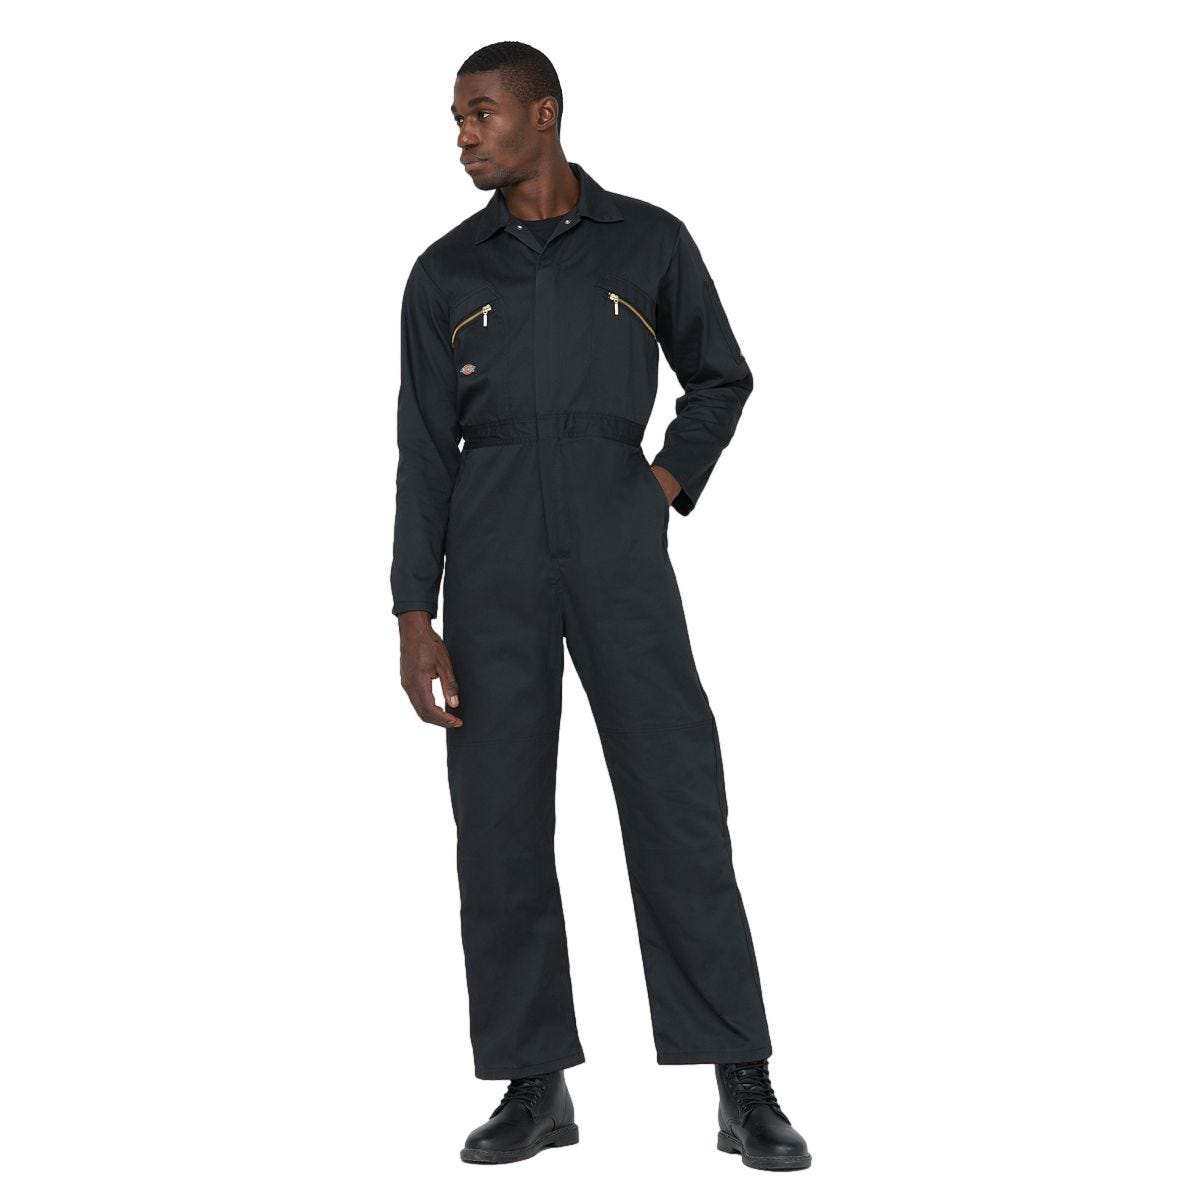 Combinaison Redhawk Coverhall Noir - Dickies - Taille XL 3